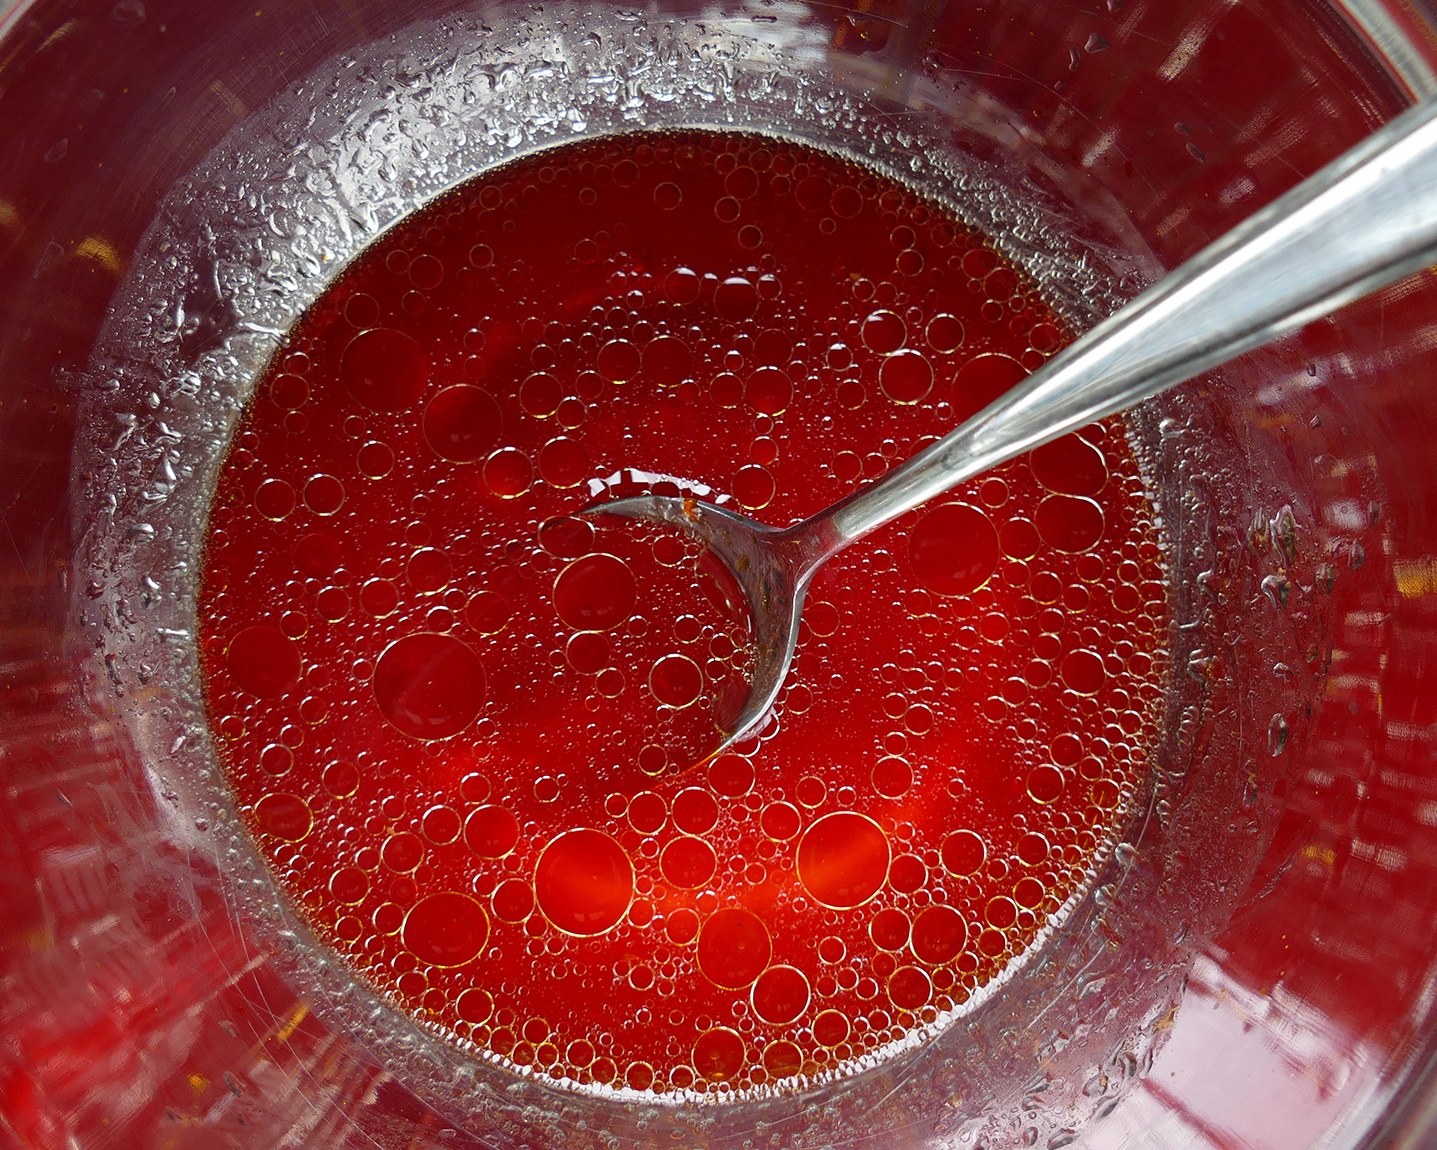 Red liquid in a metal bowl with a submerged spoon